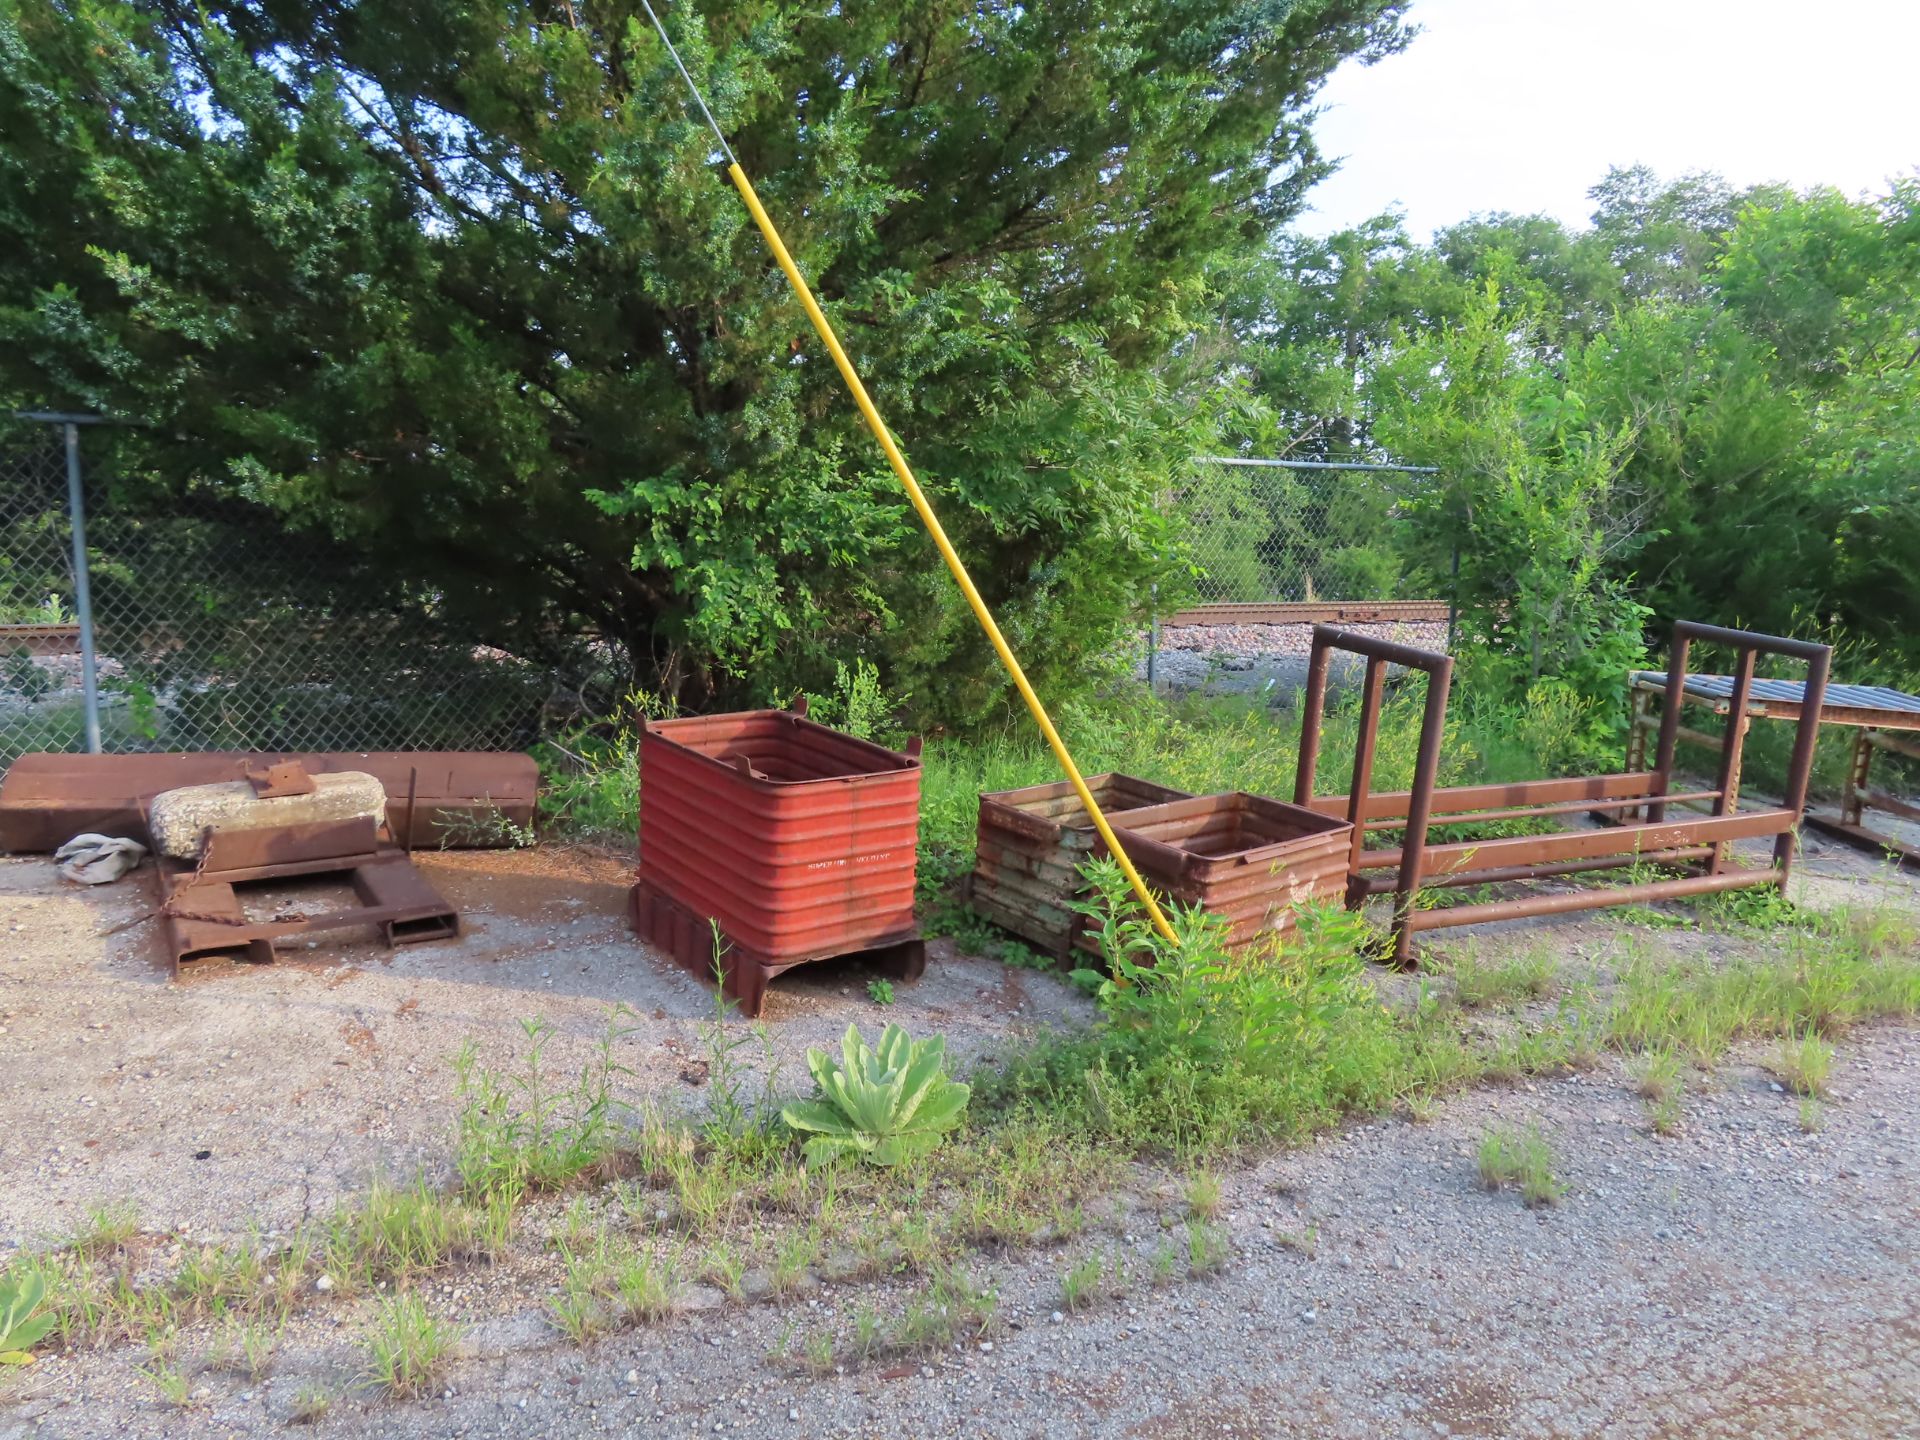 LOT MISC. TUBS & CRATES ALONG FENCE LINEBLDG: 1 - LOT MISC. TUBS & CRATES ALONG FENCE LINE - Image 2 of 2